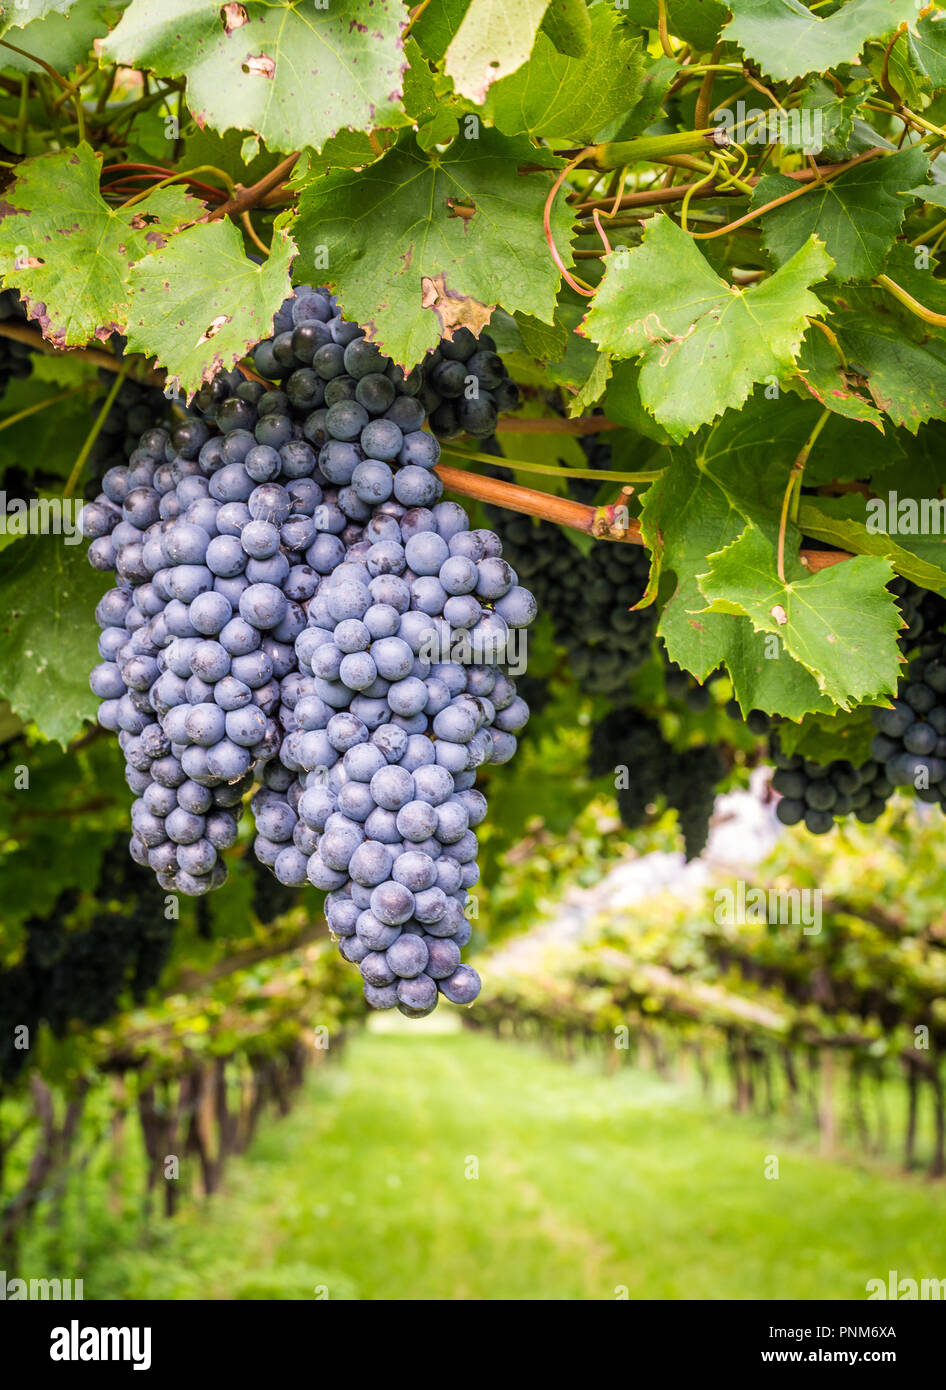 Cabernet Sauvignon grapes variety. Cabernet Sauvignon is one of the world's most widely recognized red wine grape varieties. South Tyrol- Italy Stock Photo